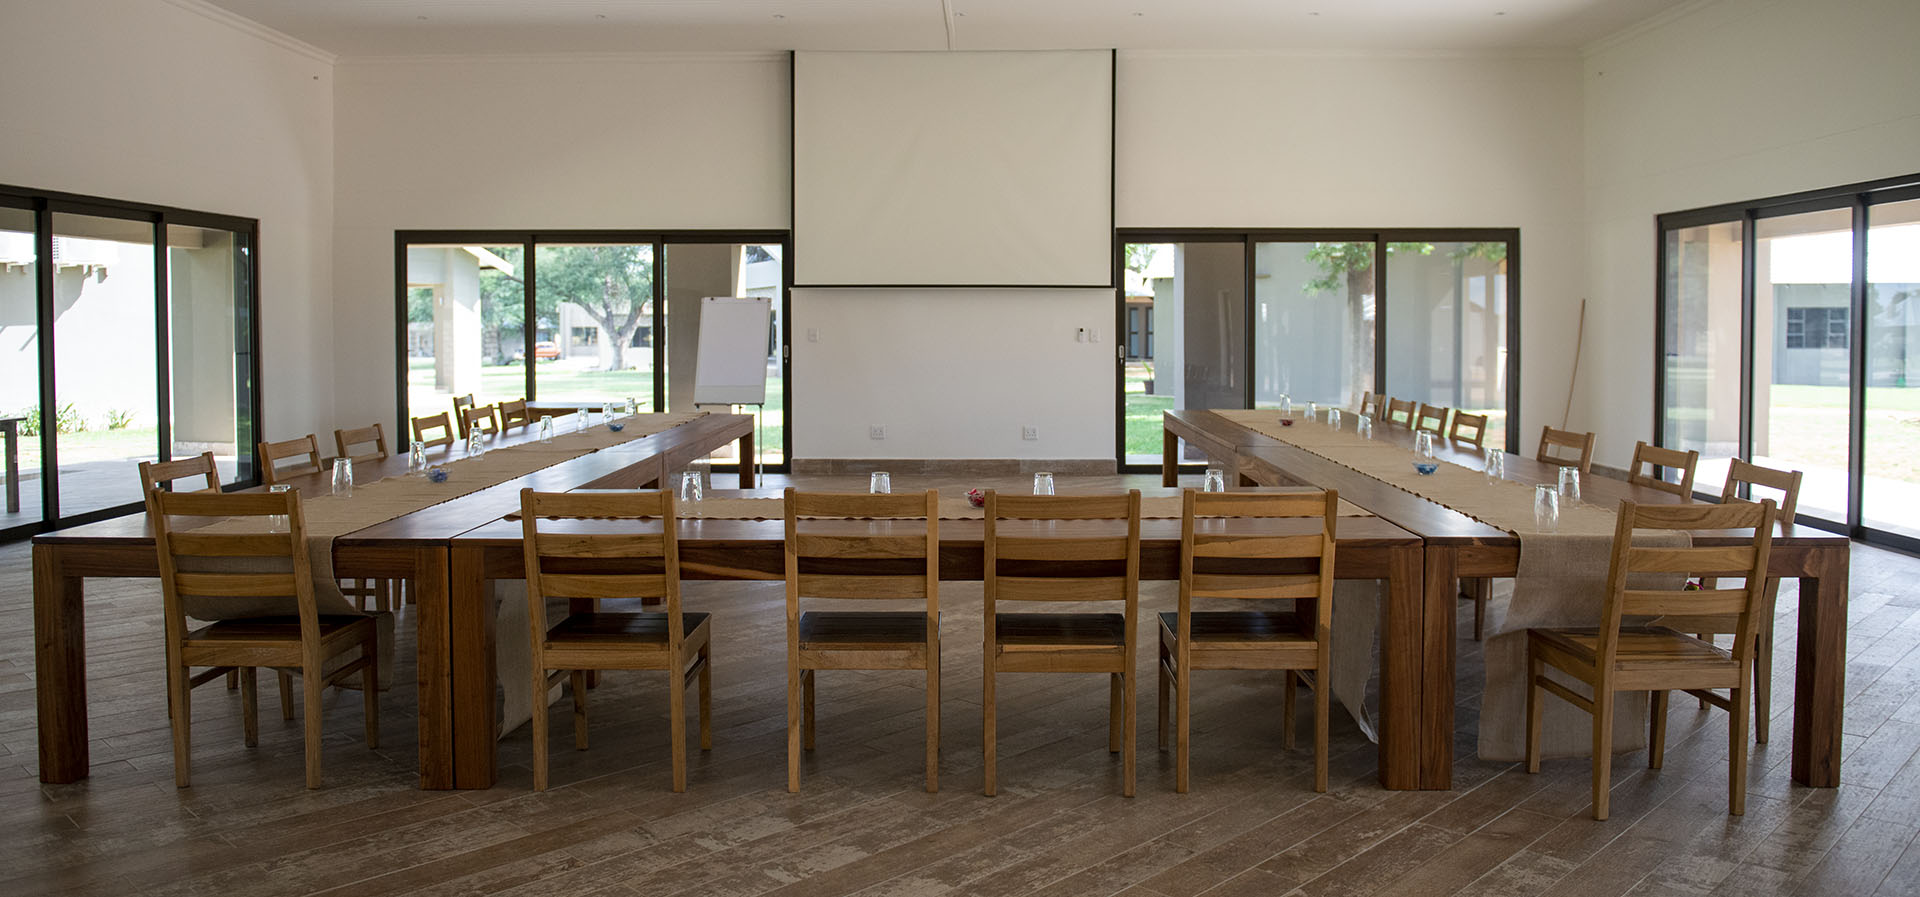 sandune conference table and projector 02